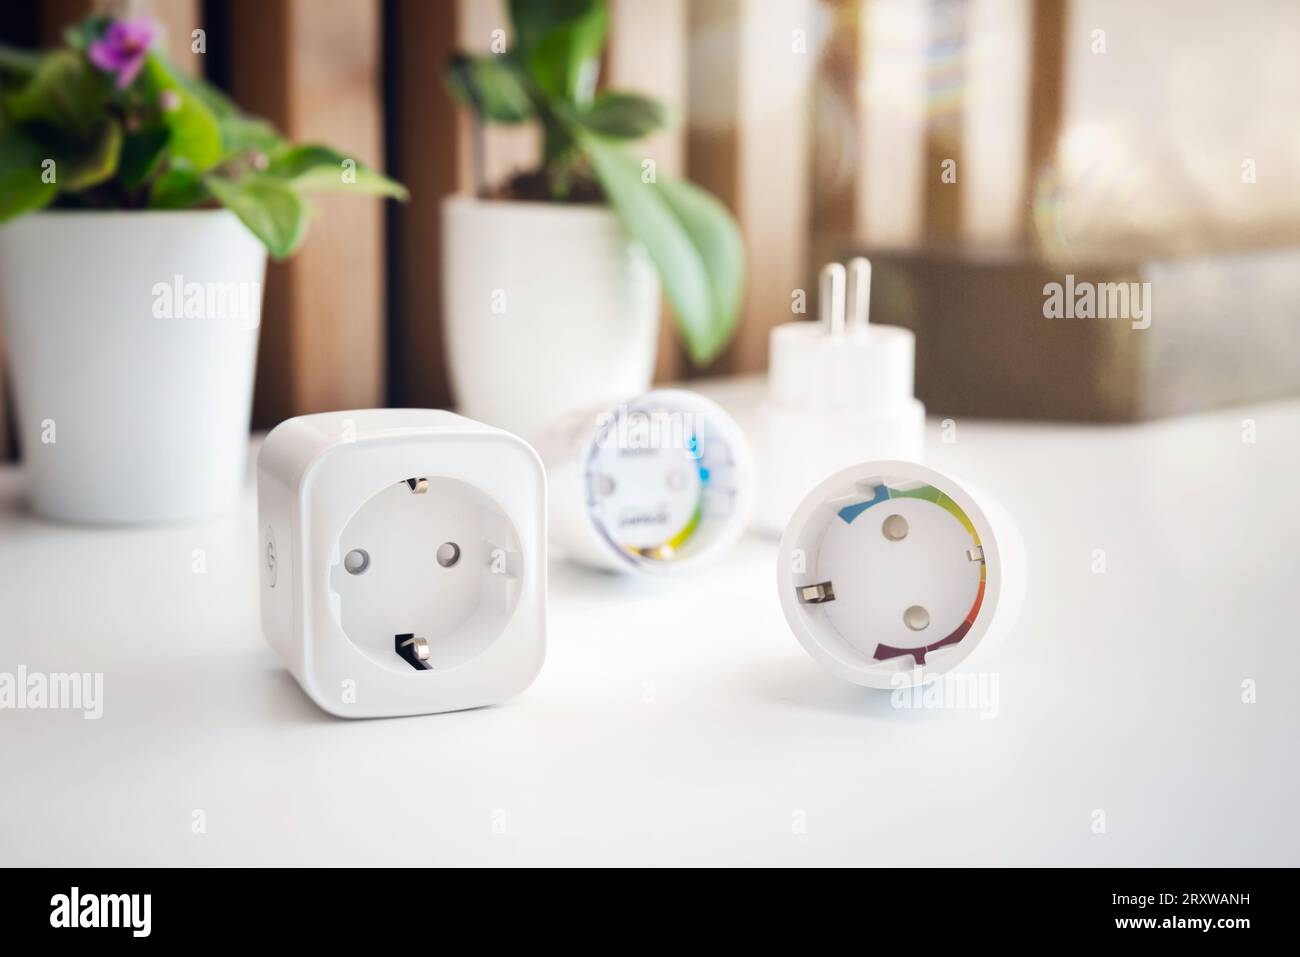 Using Wi-fi smart sockets in a smart home, controlling electricity consumption Stock Photo